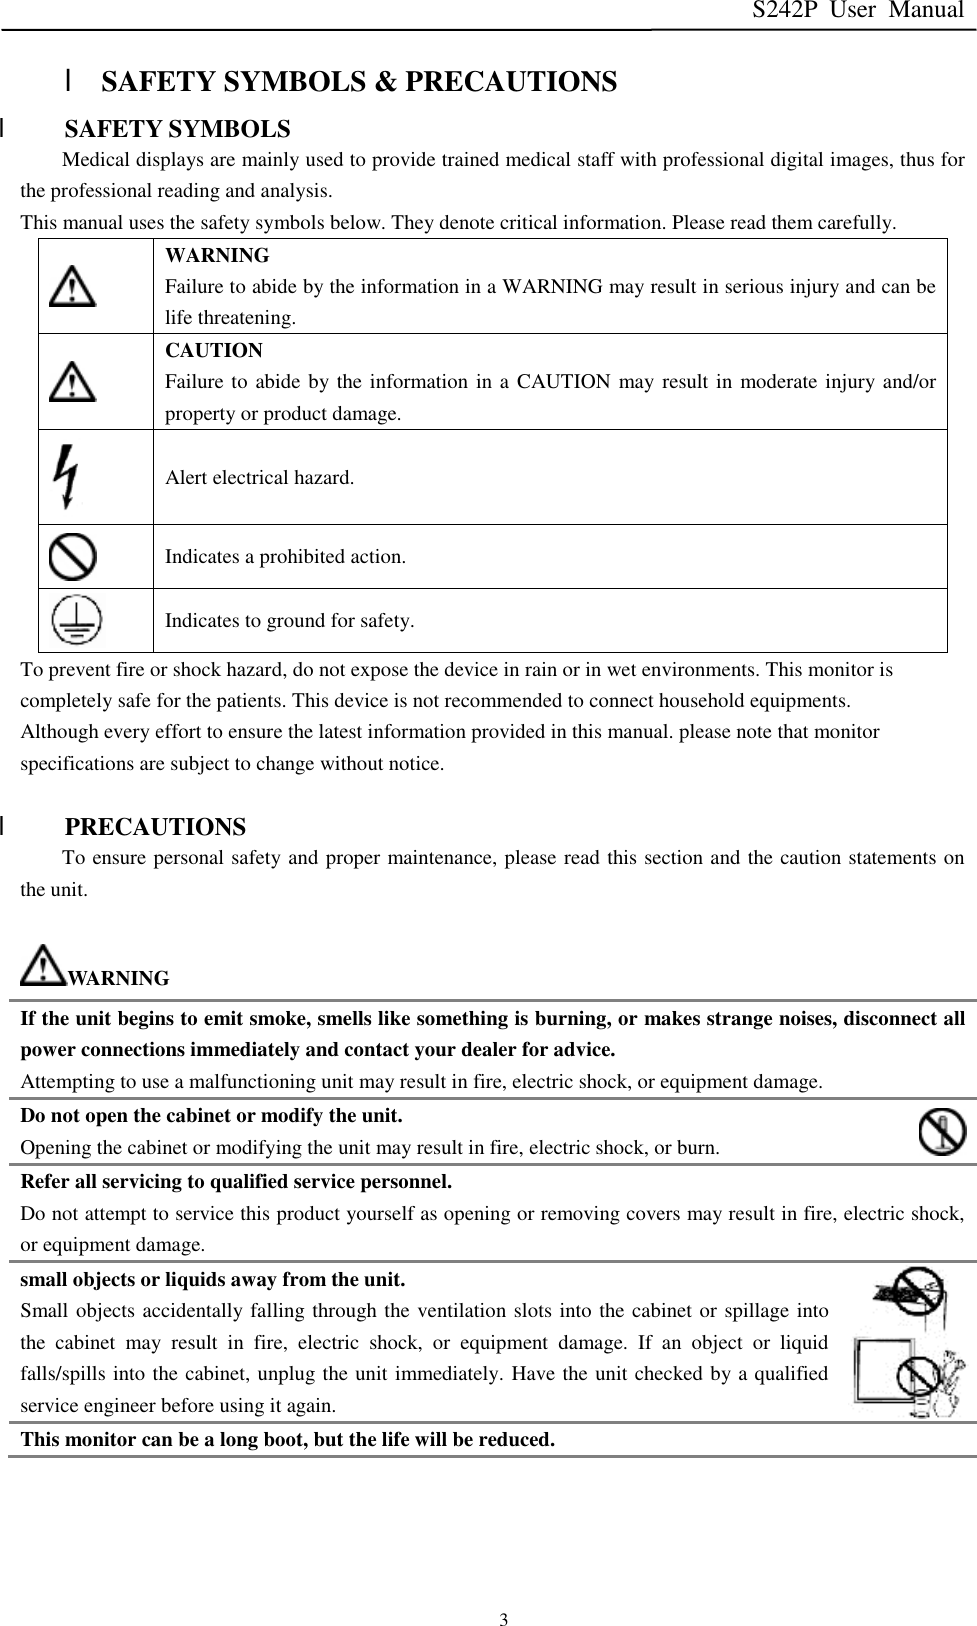 S242P User Manual   3 l SAFETY SYMBOLS &amp; PRECAUTIONS l SAFETY SYMBOLS Medical displays are mainly used to provide trained medical staff with professional digital images, thus for the professional reading and analysis. This manual uses the safety symbols below. They denote critical information. Please read them carefully.  WARNING Failure to abide by the information in a WARNING may result in serious injury and can be life threatening.  CAUTION Failure to abide by the information in a CAUTION may result in moderate injury and/or property or product damage.  Alert electrical hazard.  Indicates a prohibited action.  Indicates to ground for safety. To prevent fire or shock hazard, do not expose the device in rain or in wet environments. This monitor is completely safe for the patients. This device is not recommended to connect household equipments. Although every effort to ensure the latest information provided in this manual. please note that monitor specifications are subject to change without notice.  l PRECAUTIONS To ensure personal safety and proper maintenance, please read this section and the caution statements on the unit.  WARNING If the unit begins to emit smoke, smells like something is burning, or makes strange noises, disconnect all power connections immediately and contact your dealer for advice. Attempting to use a malfunctioning unit may result in fire, electric shock, or equipment damage. Do not open the cabinet or modify the unit. Opening the cabinet or modifying the unit may result in fire, electric shock, or burn. Refer all servicing to qualified service personnel. Do not attempt to service this product yourself as opening or removing covers may result in fire, electric shock, or equipment damage. small objects or liquids away from the unit. Small objects accidentally falling through the ventilation slots into the cabinet or spillage into the cabinet may result in fire, electric shock, or equipment damage. If an object or liquid falls/spills into the cabinet, unplug the unit immediately. Have the unit checked by a qualified service engineer before using it again. This monitor can be a long boot, but the life will be reduced. 